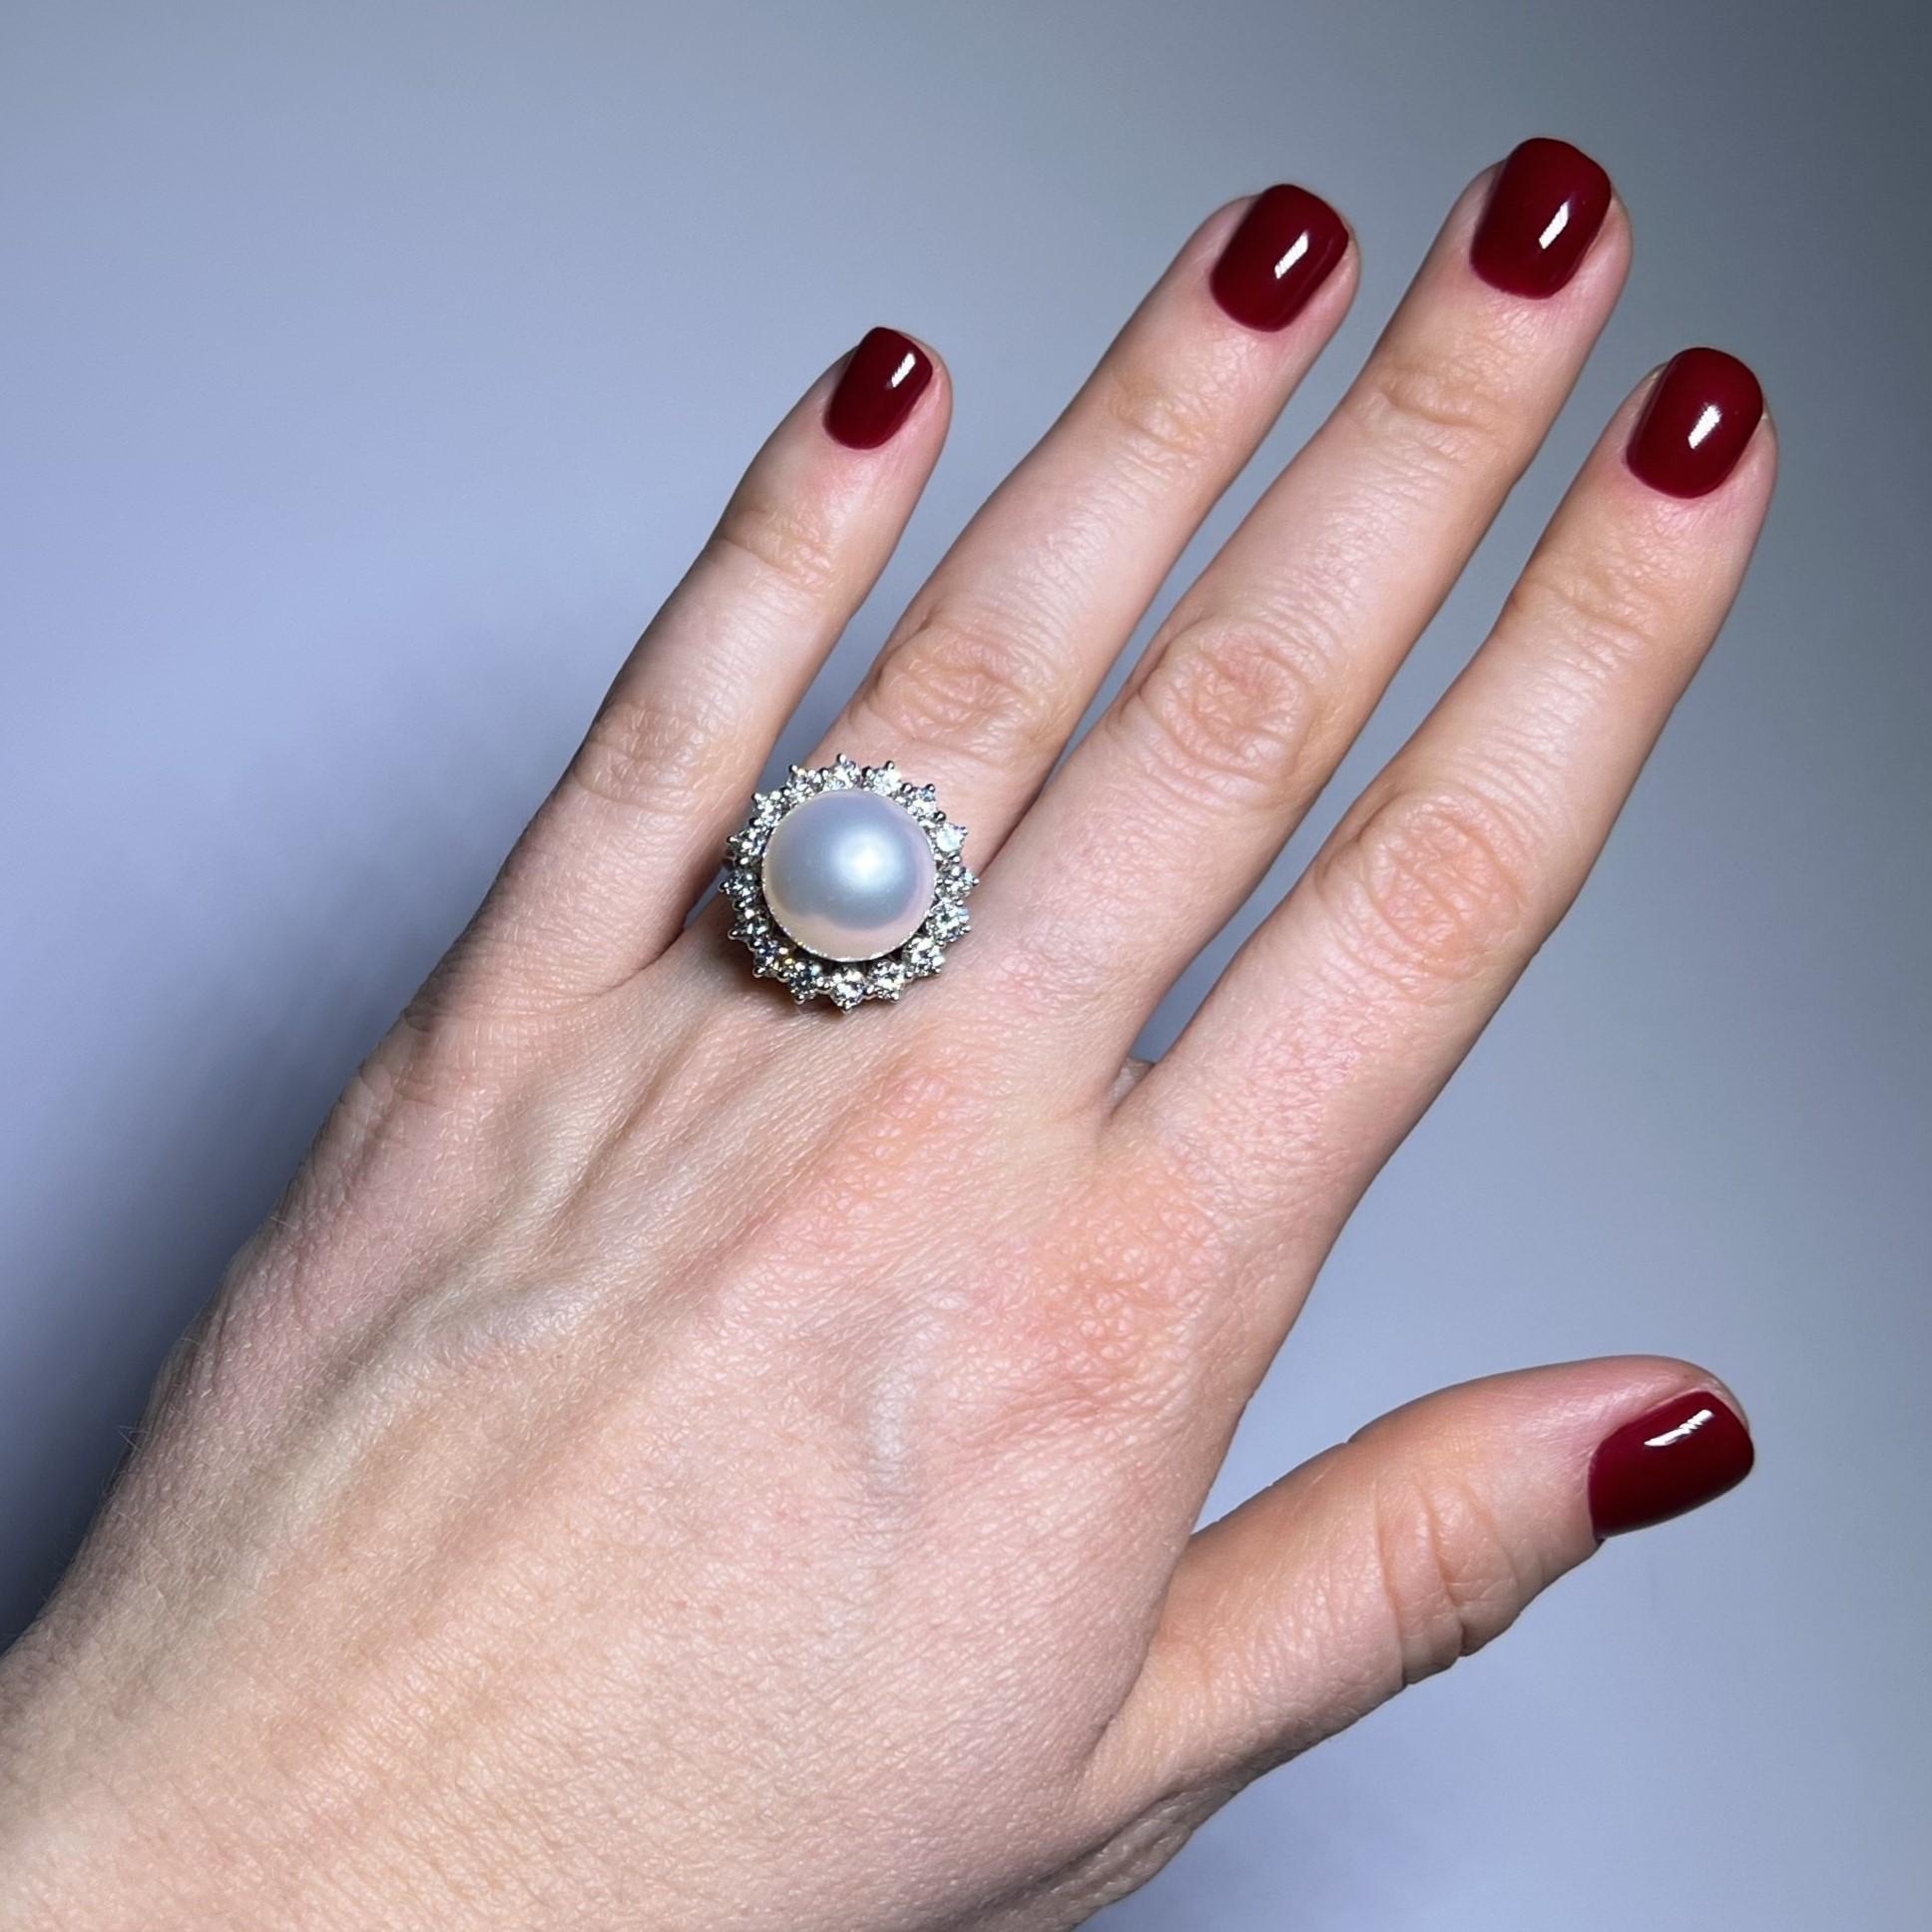 Elevate your elegance with our stunning pearl ring. Designed in 18 Karat white gold, it features a radiant South Sea cultural pearl at its heart, exuding natural charm. Encircled by a halo of 16 brilliant-cut diamonds totaling 0.96 carats,